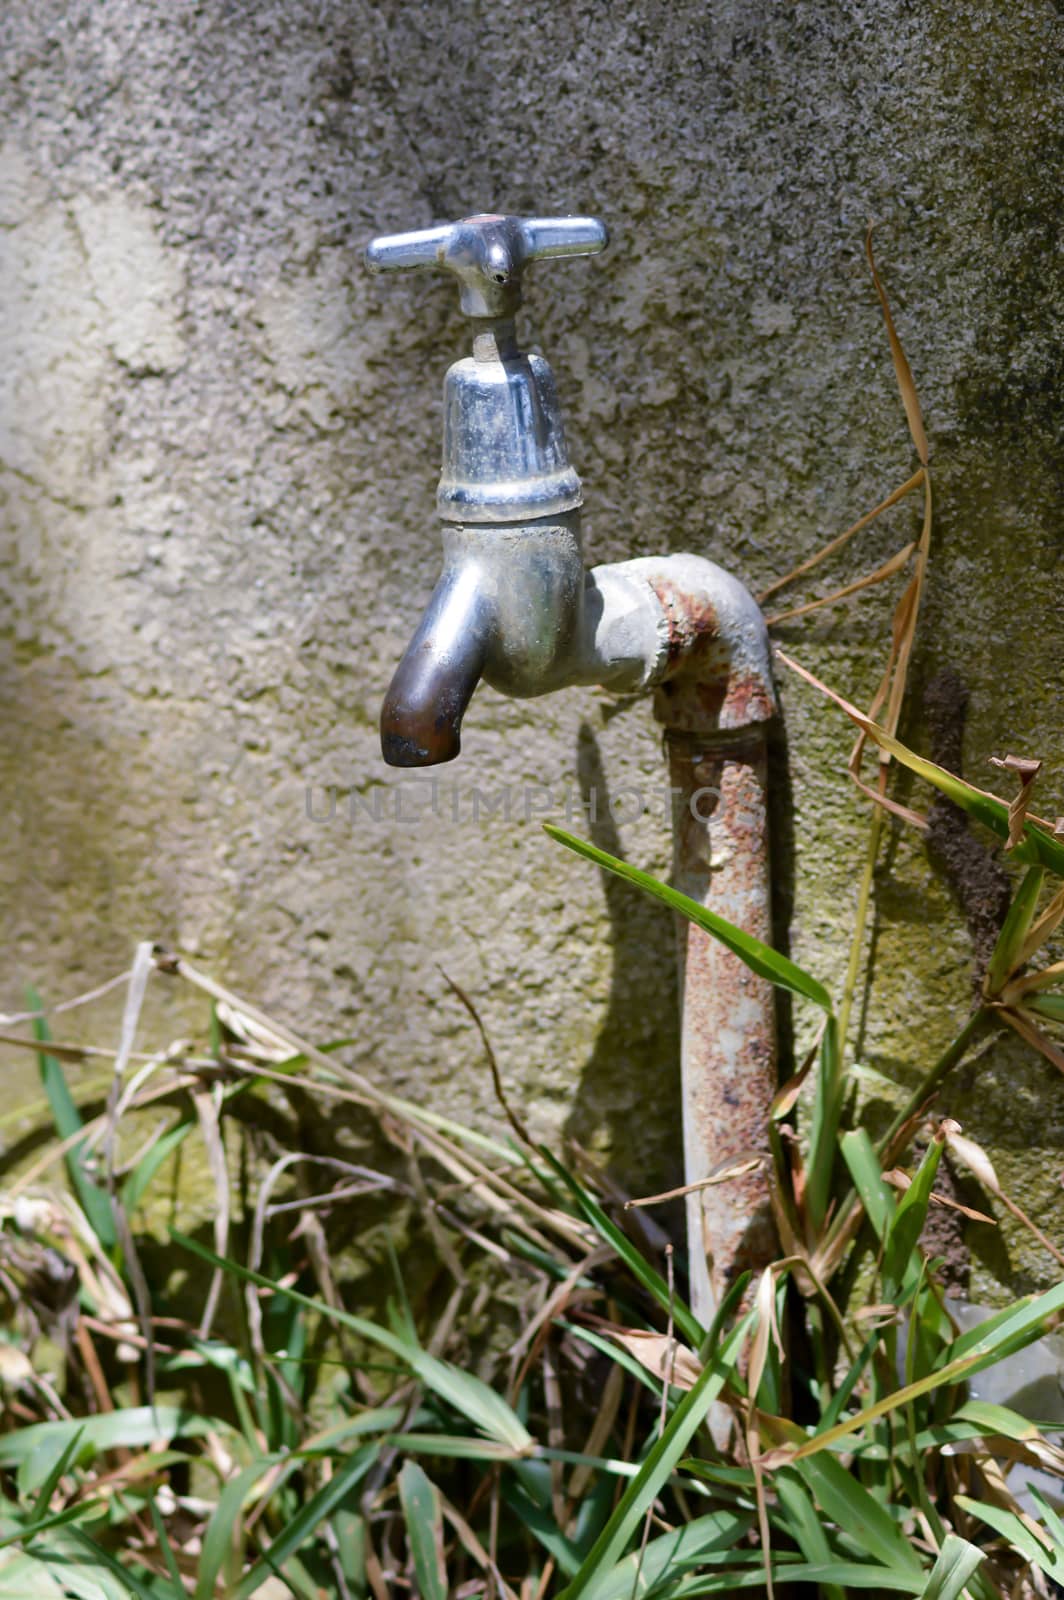 Water supply tap in the garden on a half inch pipe